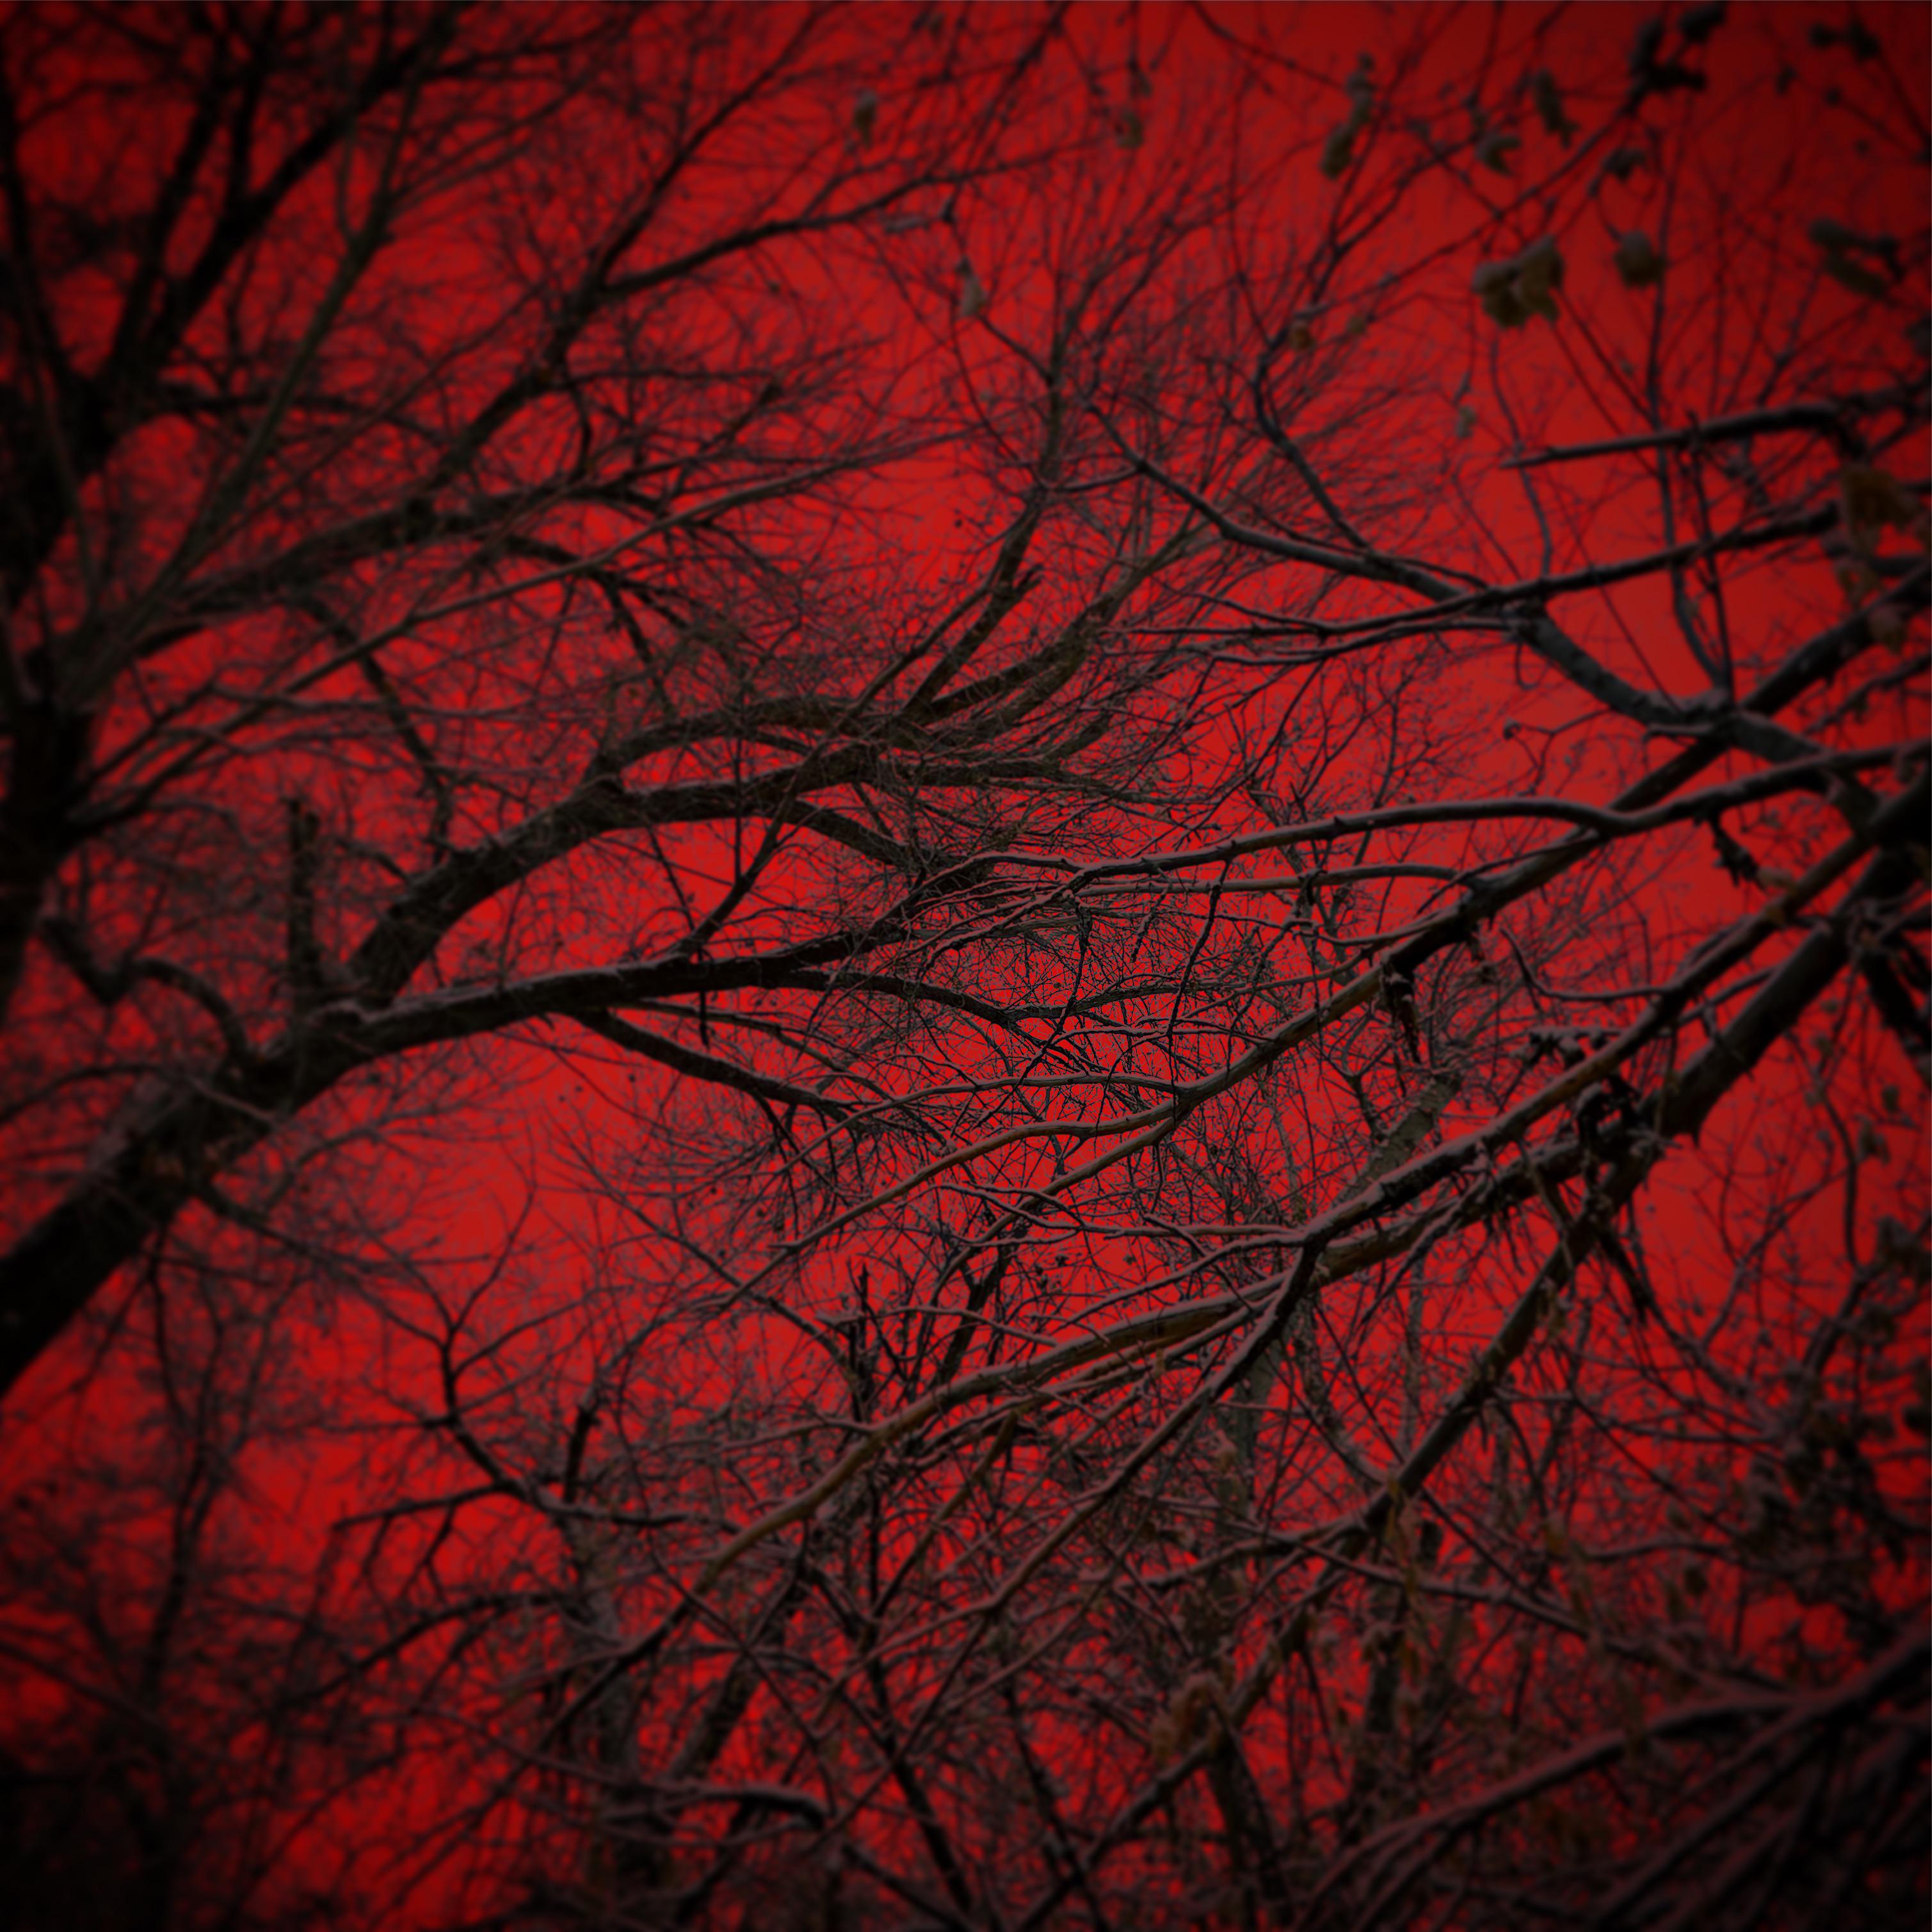 A red sky with trees in the foreground - Crimson